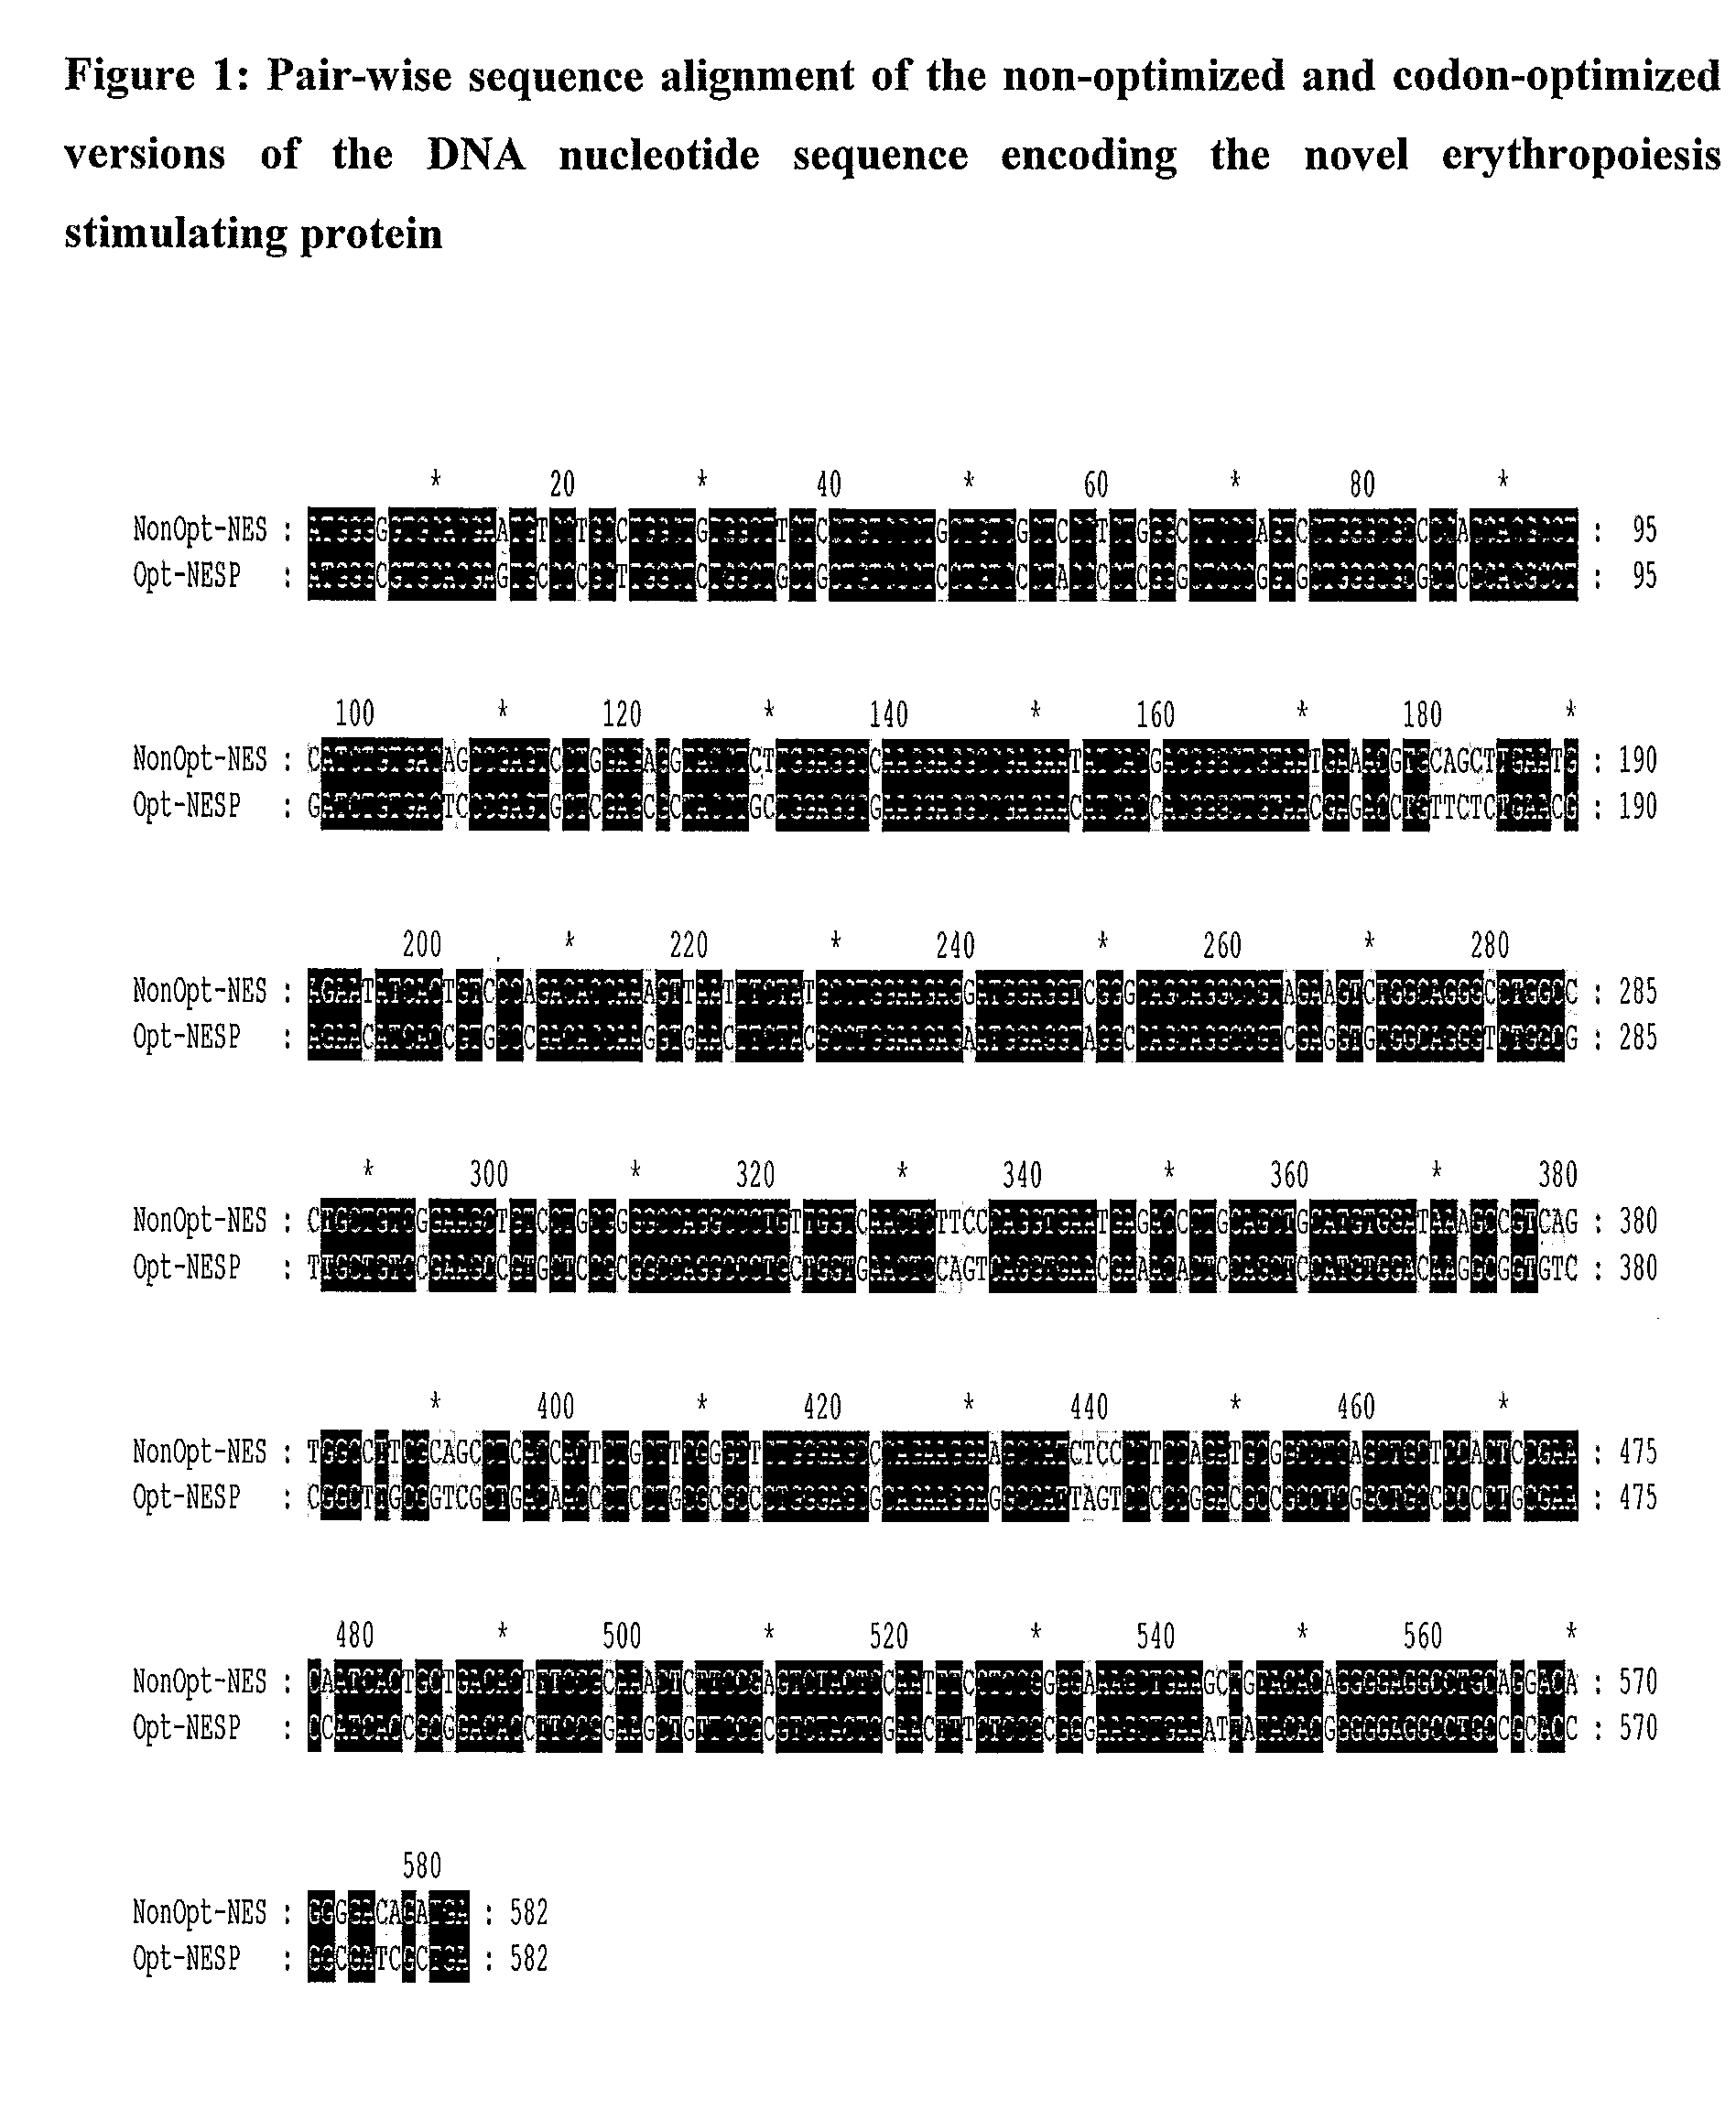 Recombinant Method for Production of an Erythropoiesis Stimulating Protein